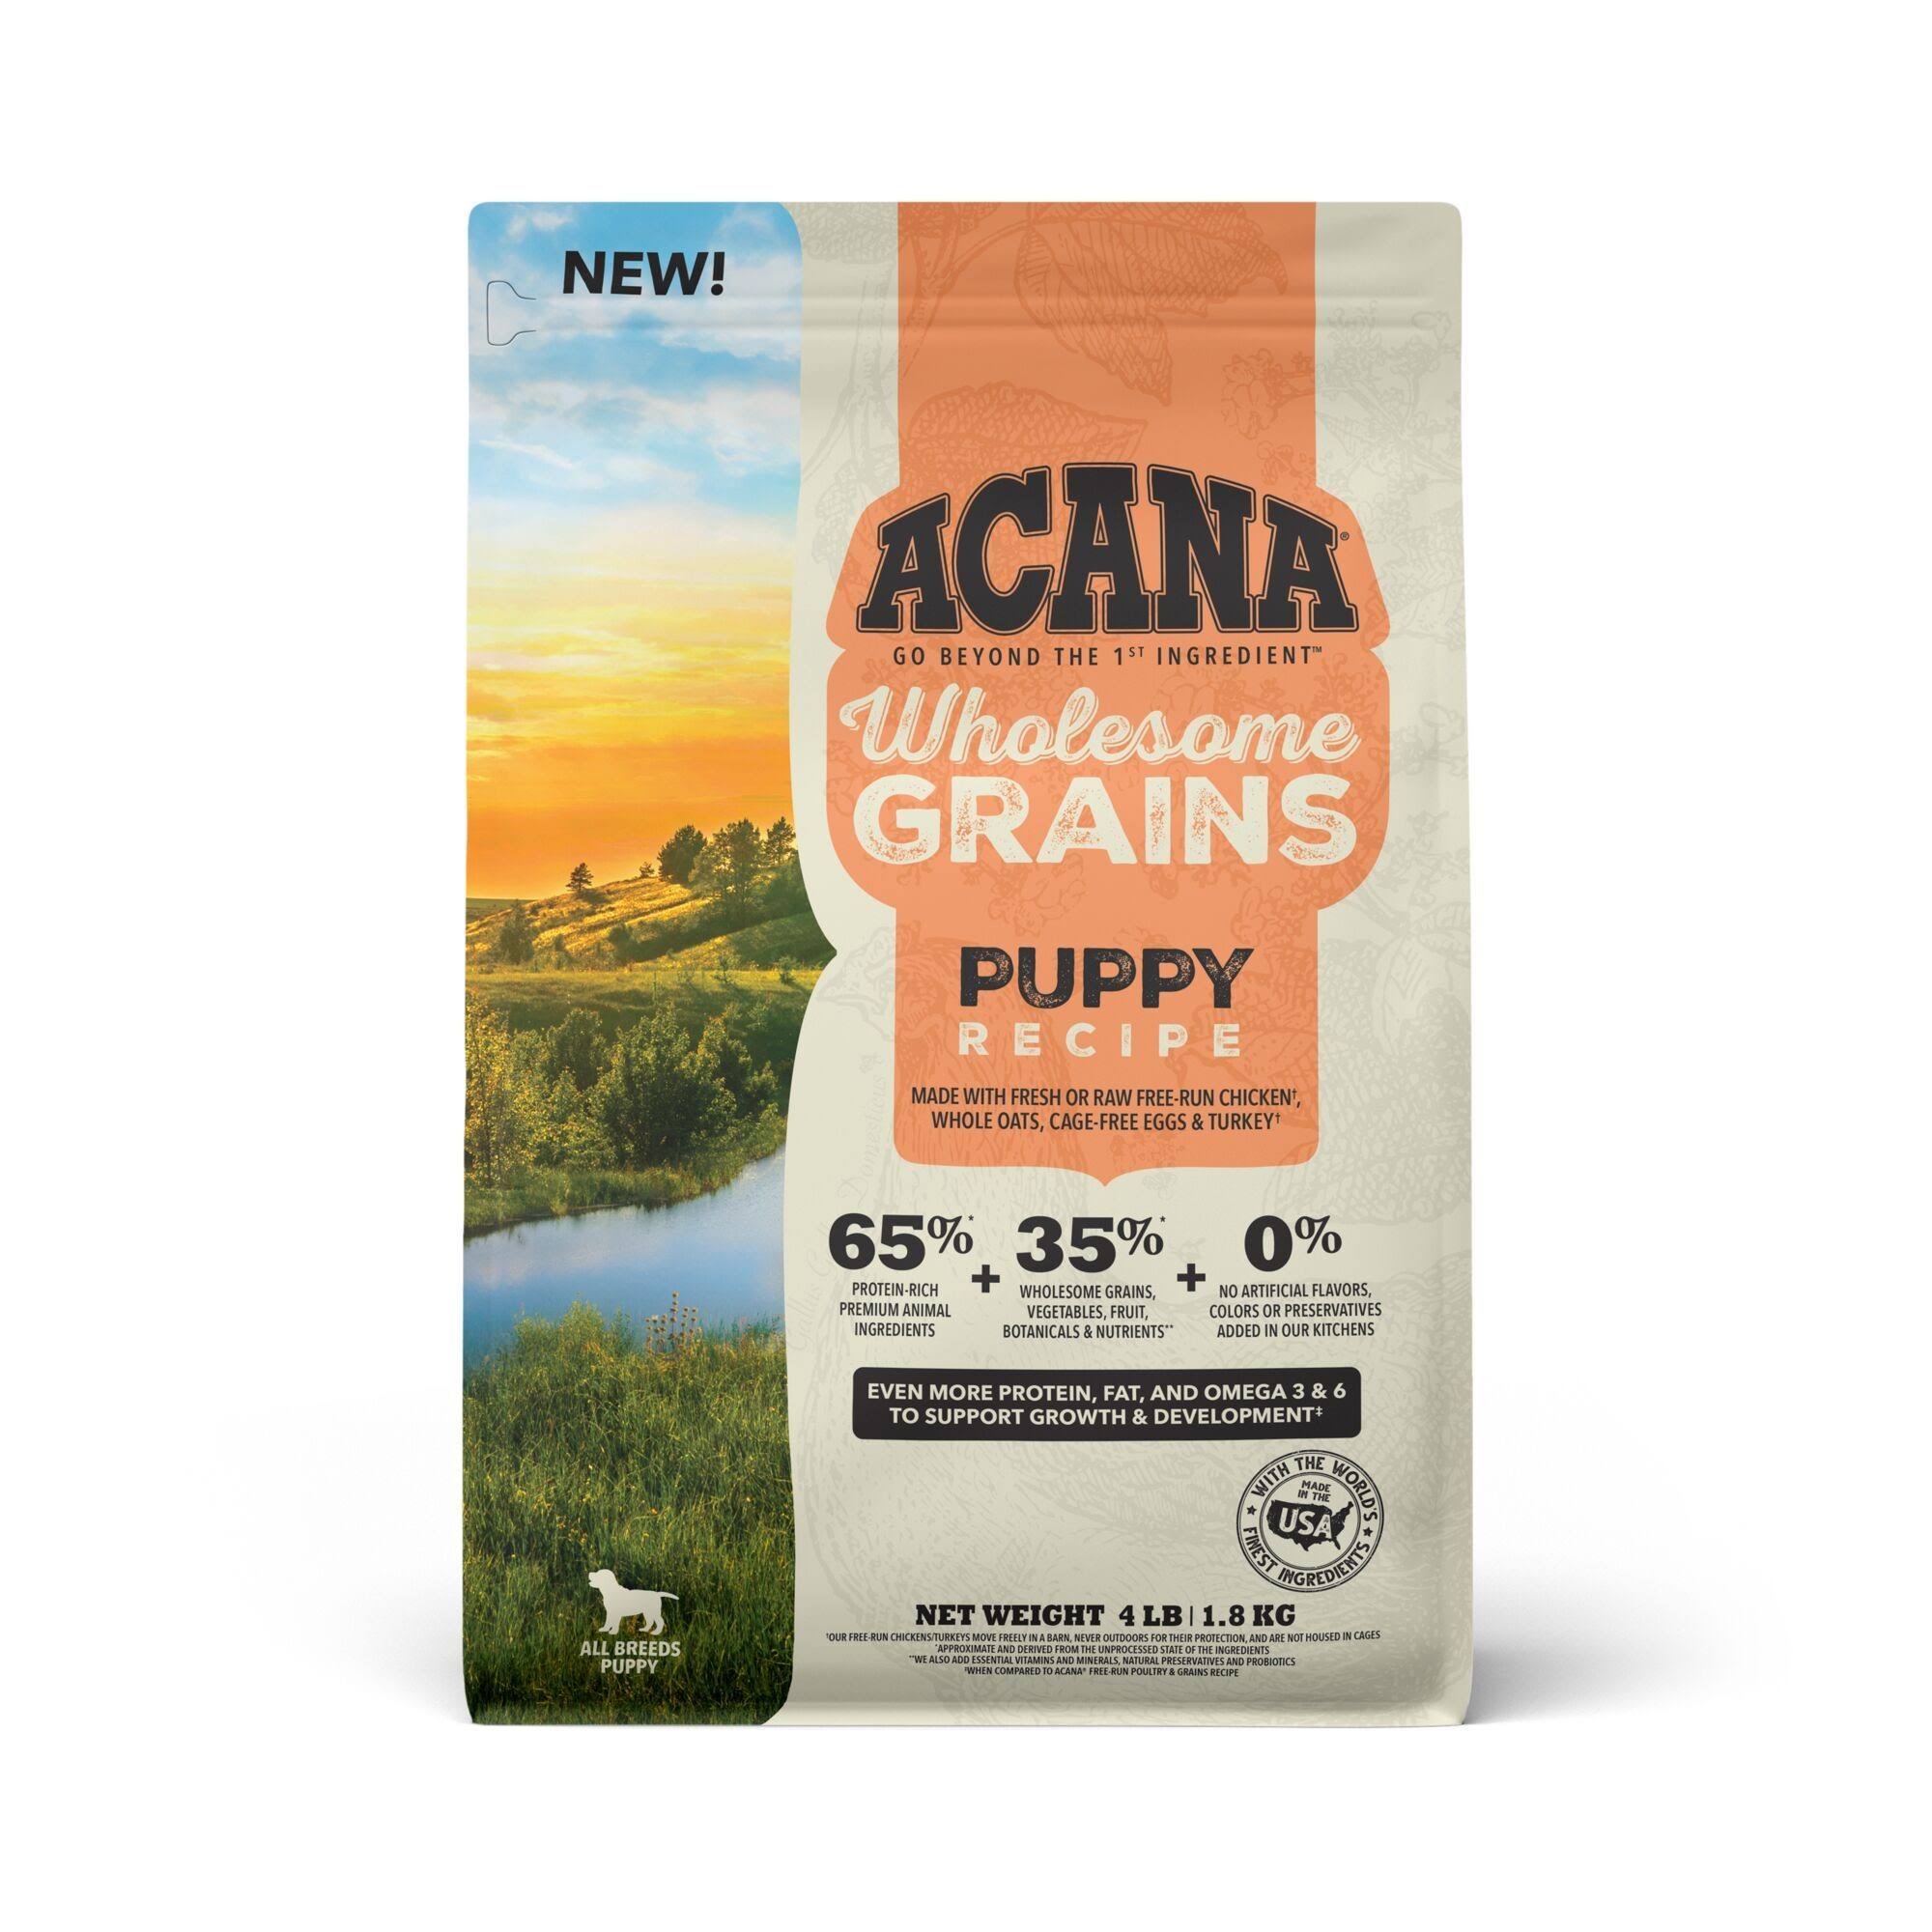 ACANA Wholesome Grains Puppy Recipe Dry Dog Food - 4 lb